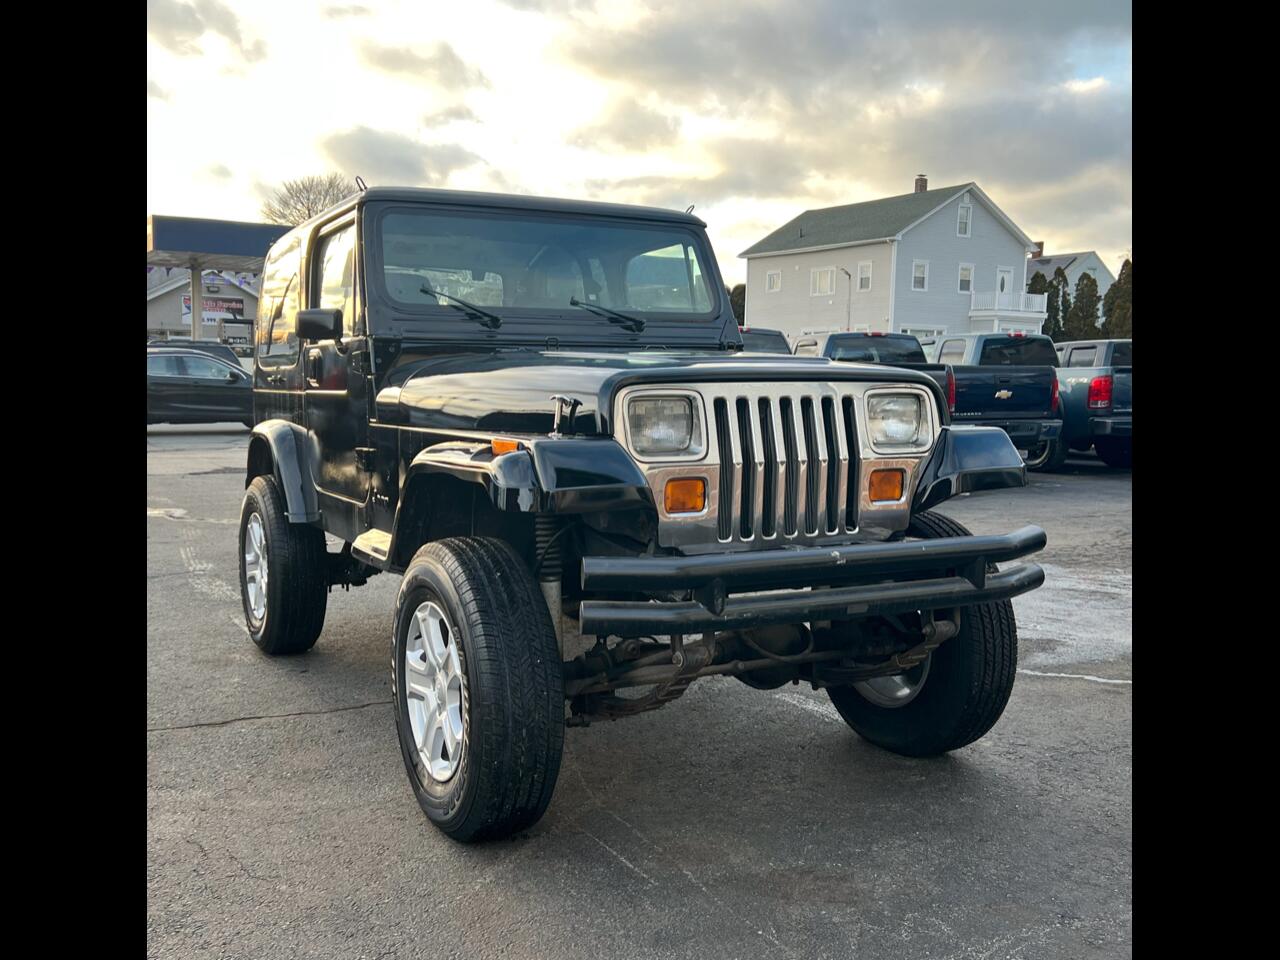 Used 1994 Jeep Wrangler S for Sale in New Bedford MA 02740 039 Auto Sales  New Bedford